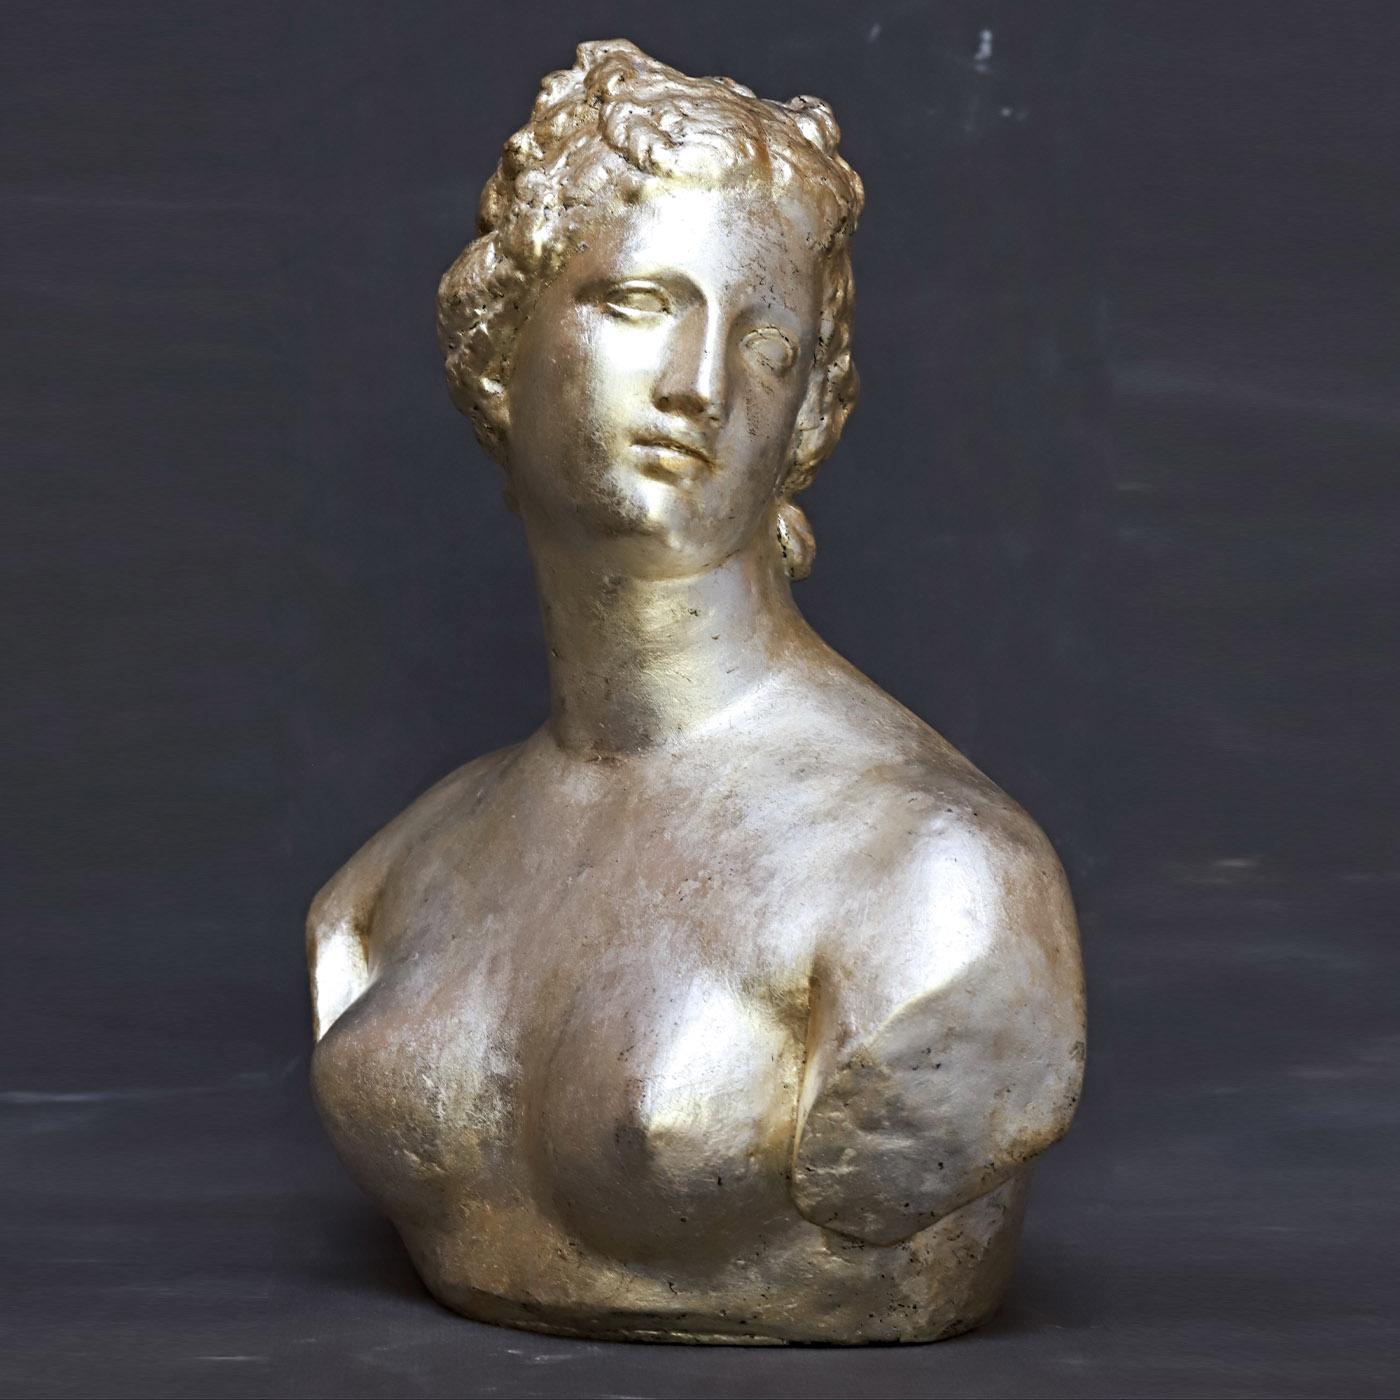 Masterfully sculpted by Romanelli artists, this elegant sculpture reproduces a priceless Hellenistic marble statue from the 1st century BC housed in the Uffizi Gallery in Florence. The minute, accurate rendering of the locks of hair creates superb